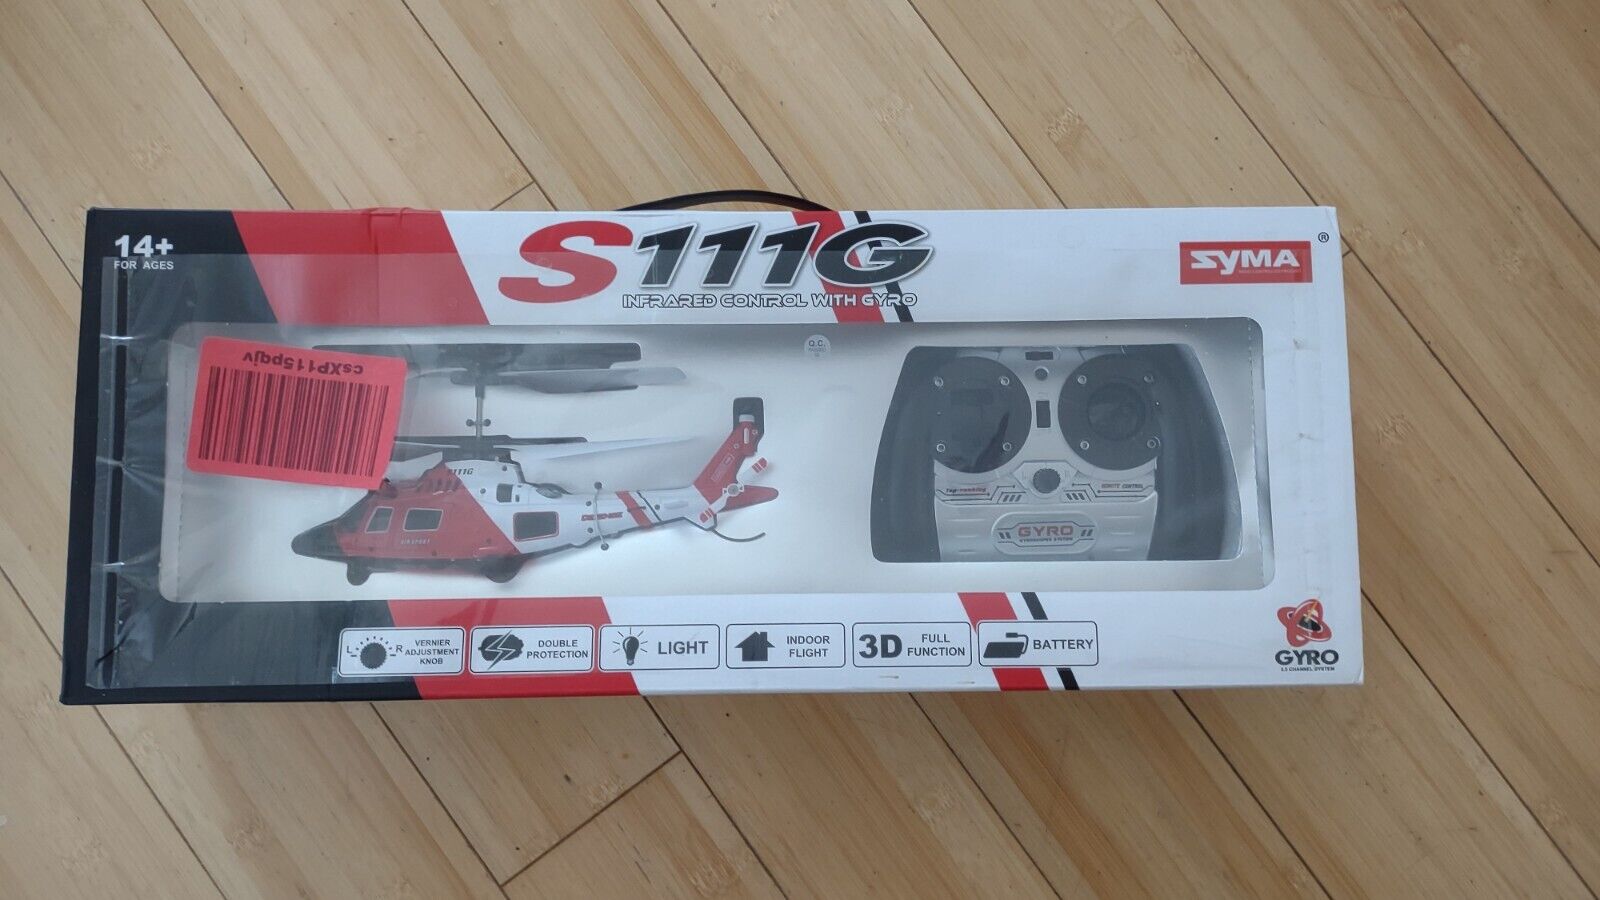 SYMA 3111G RC INFRARED HELICOPTER WITH GYRO DRONE NEW